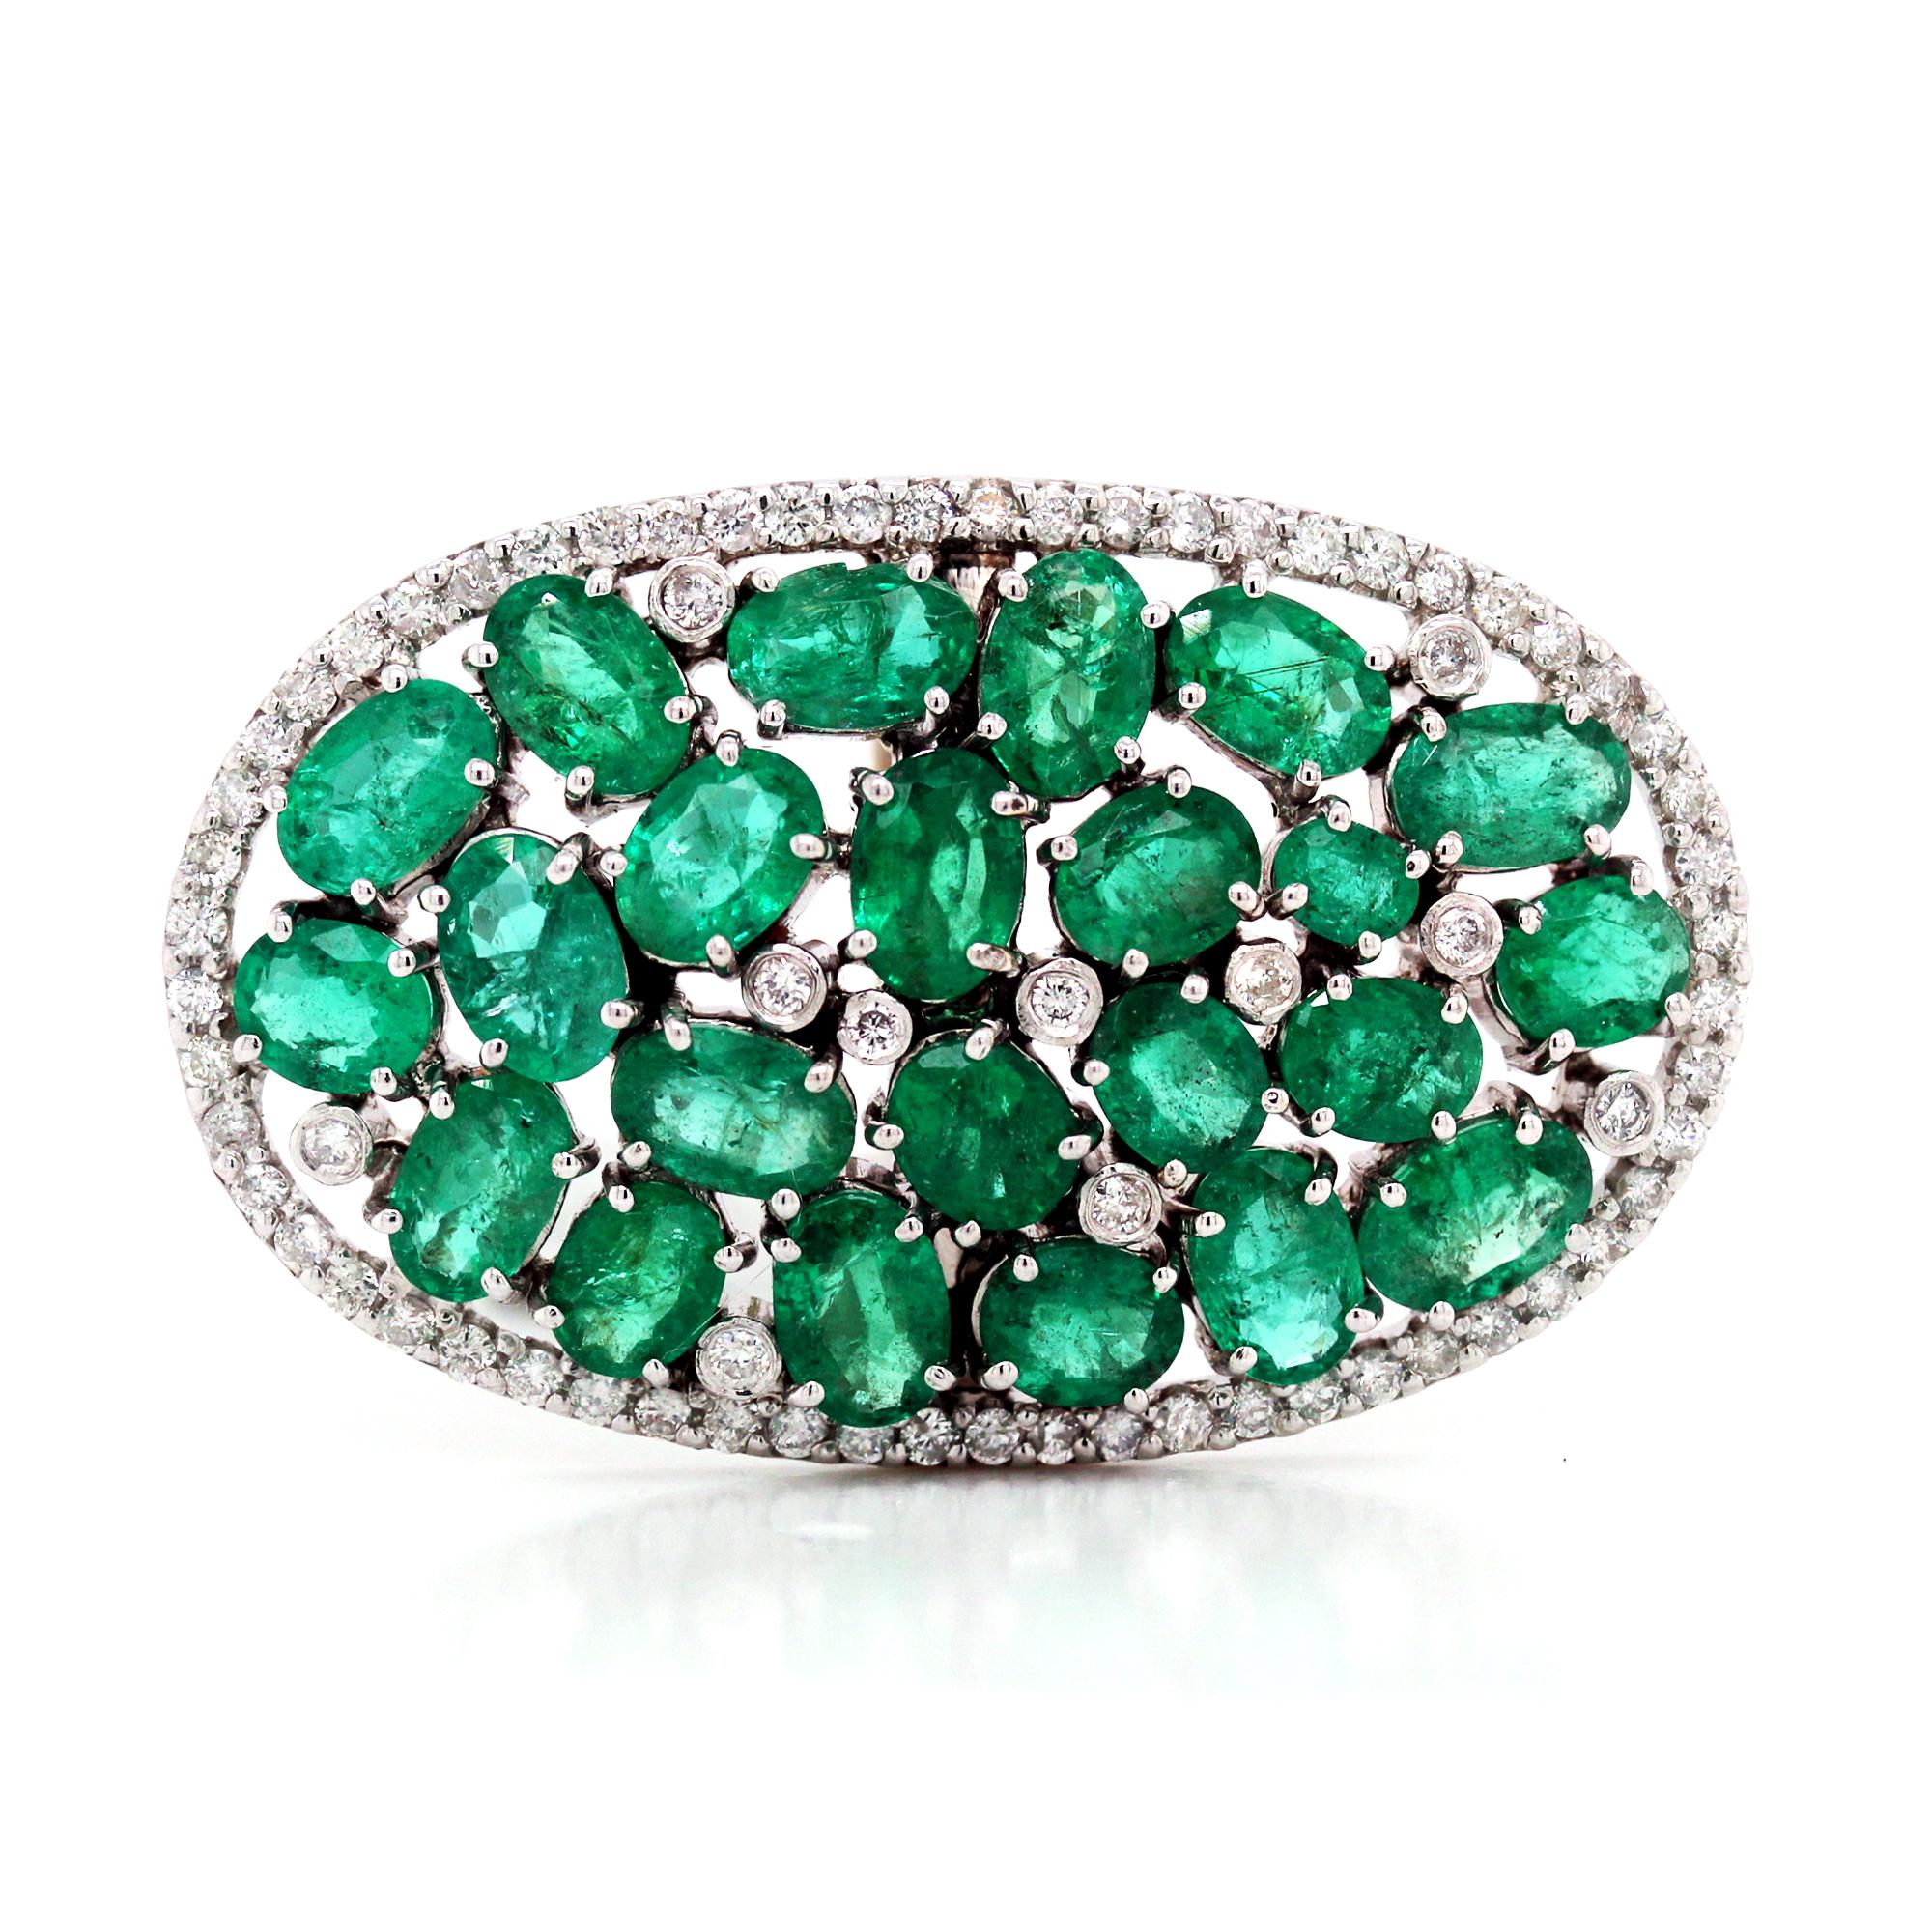 14K White Gold and Diamond Cluster Ring with Emeralds

Emeralds are oval cuts, 23 total. Sizes vary, apprx. 20 carat total weight. Emerald origins are unknown, but we believe them to be Zambian.

Apprx. 1 carat diamonds total weight. 

Ring face is